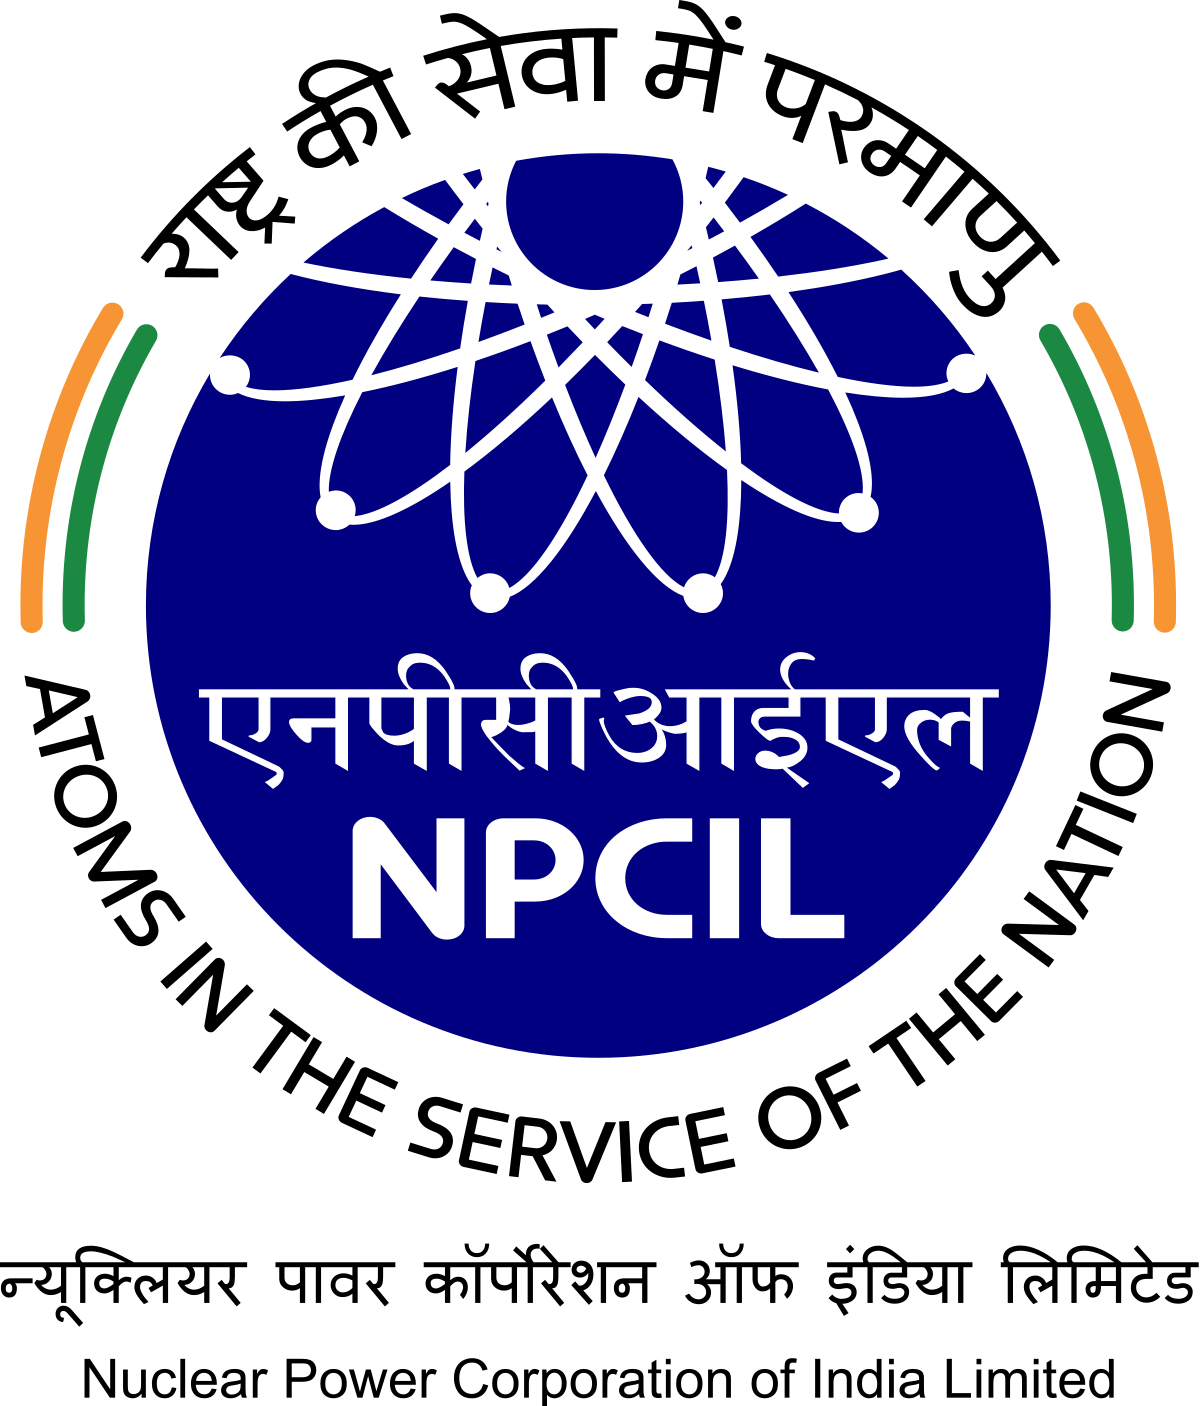 NPCIL : Nuclear Power Corp. India Limited